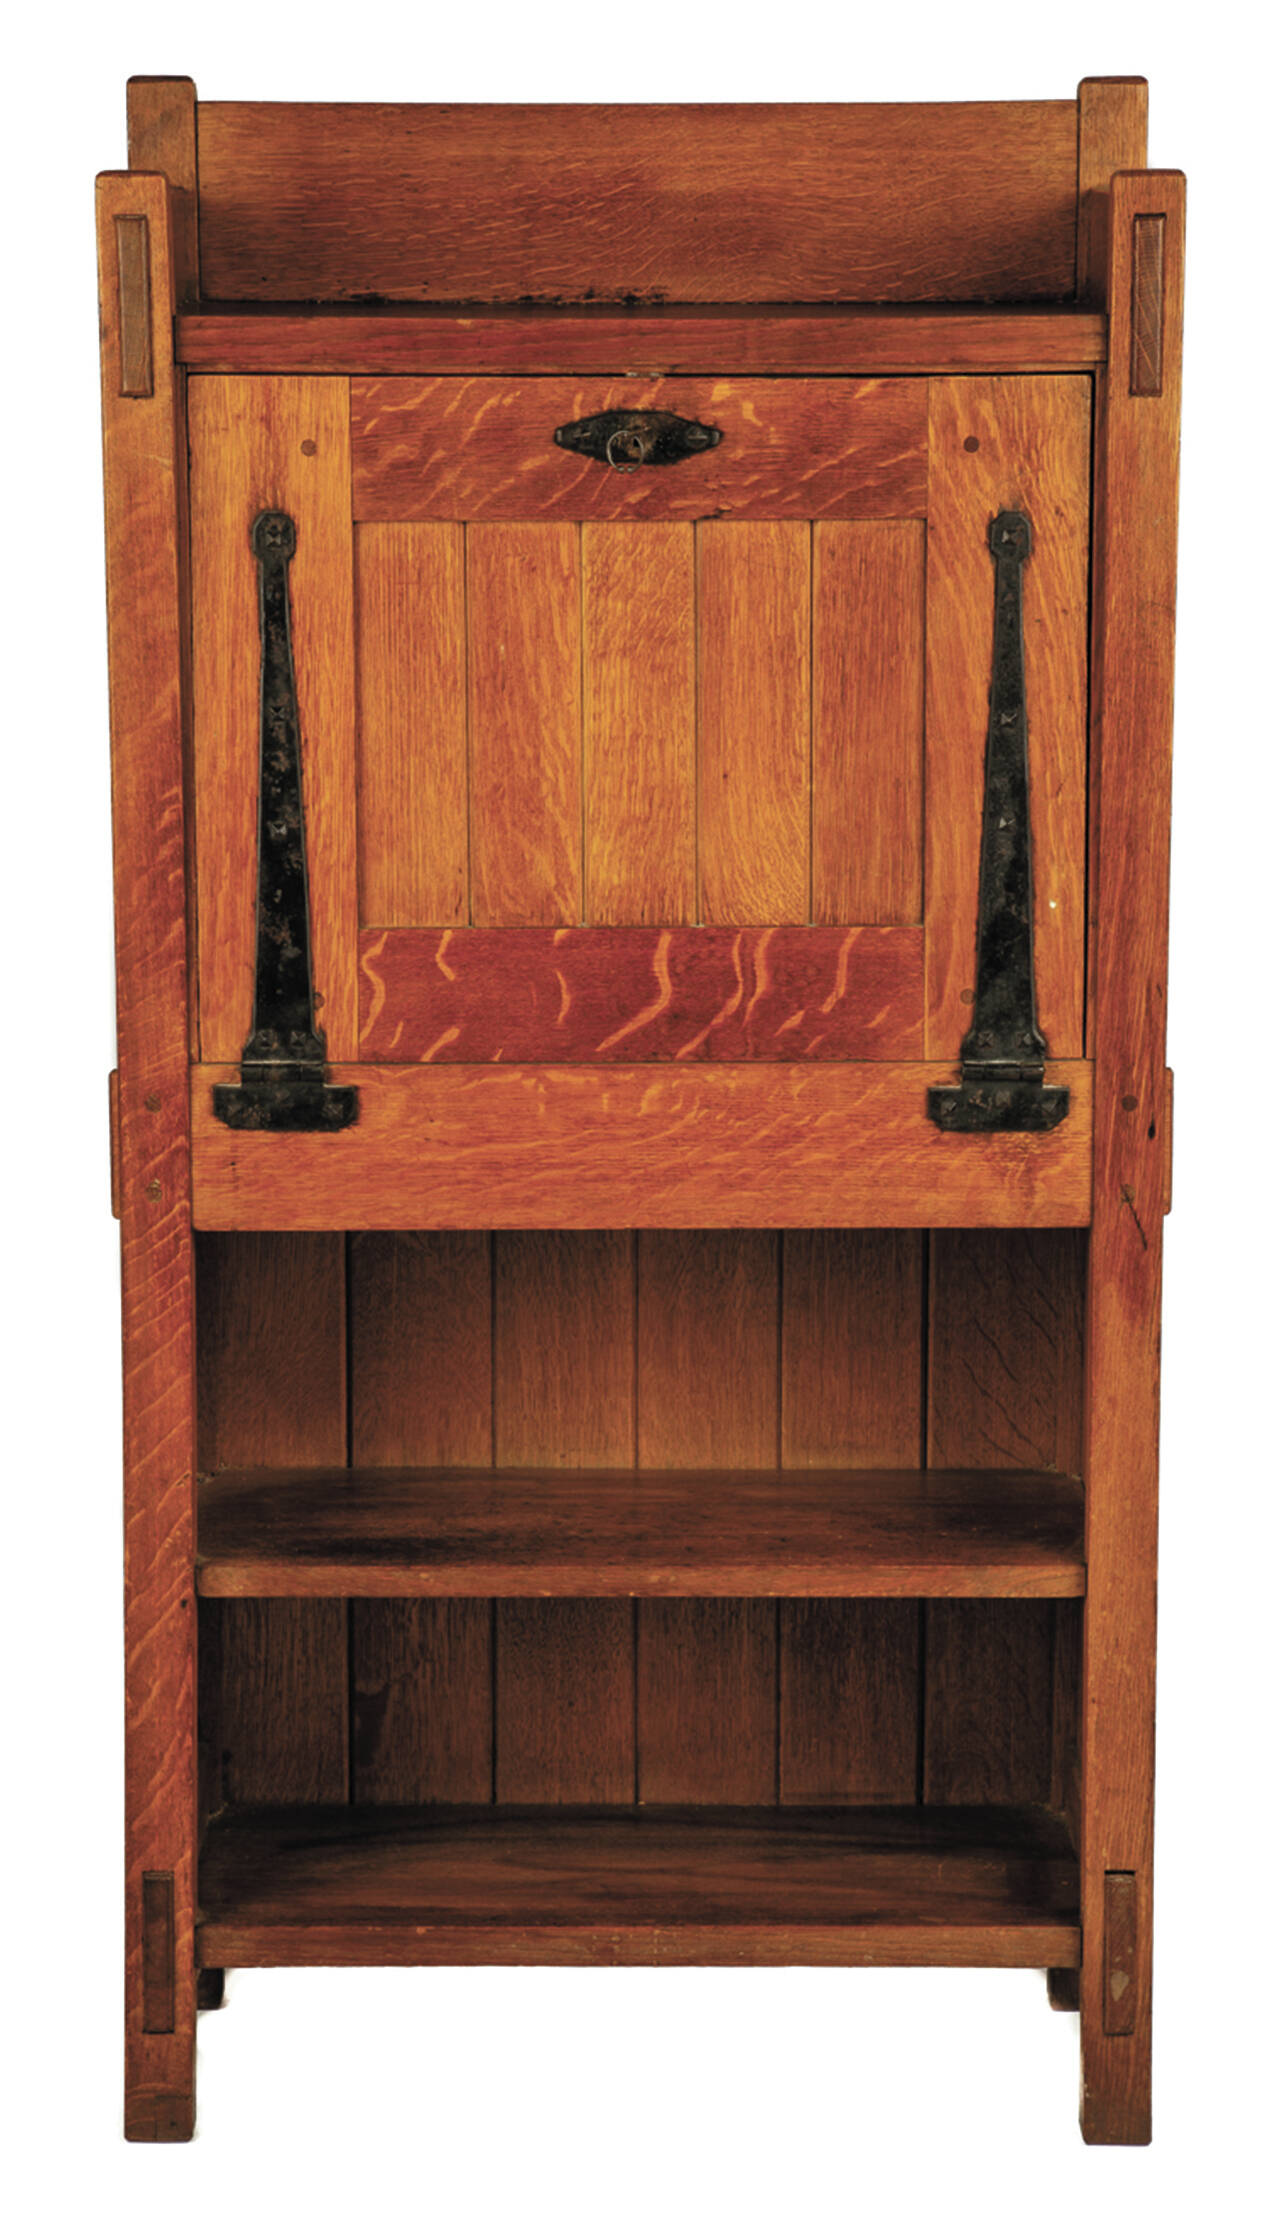 As an early example of Gustav Stickley’s work, this oak fall front desk is an Arts and Crafts design. It sold for $3,900 at Cottone Auctions. (Cowles Syndicate)